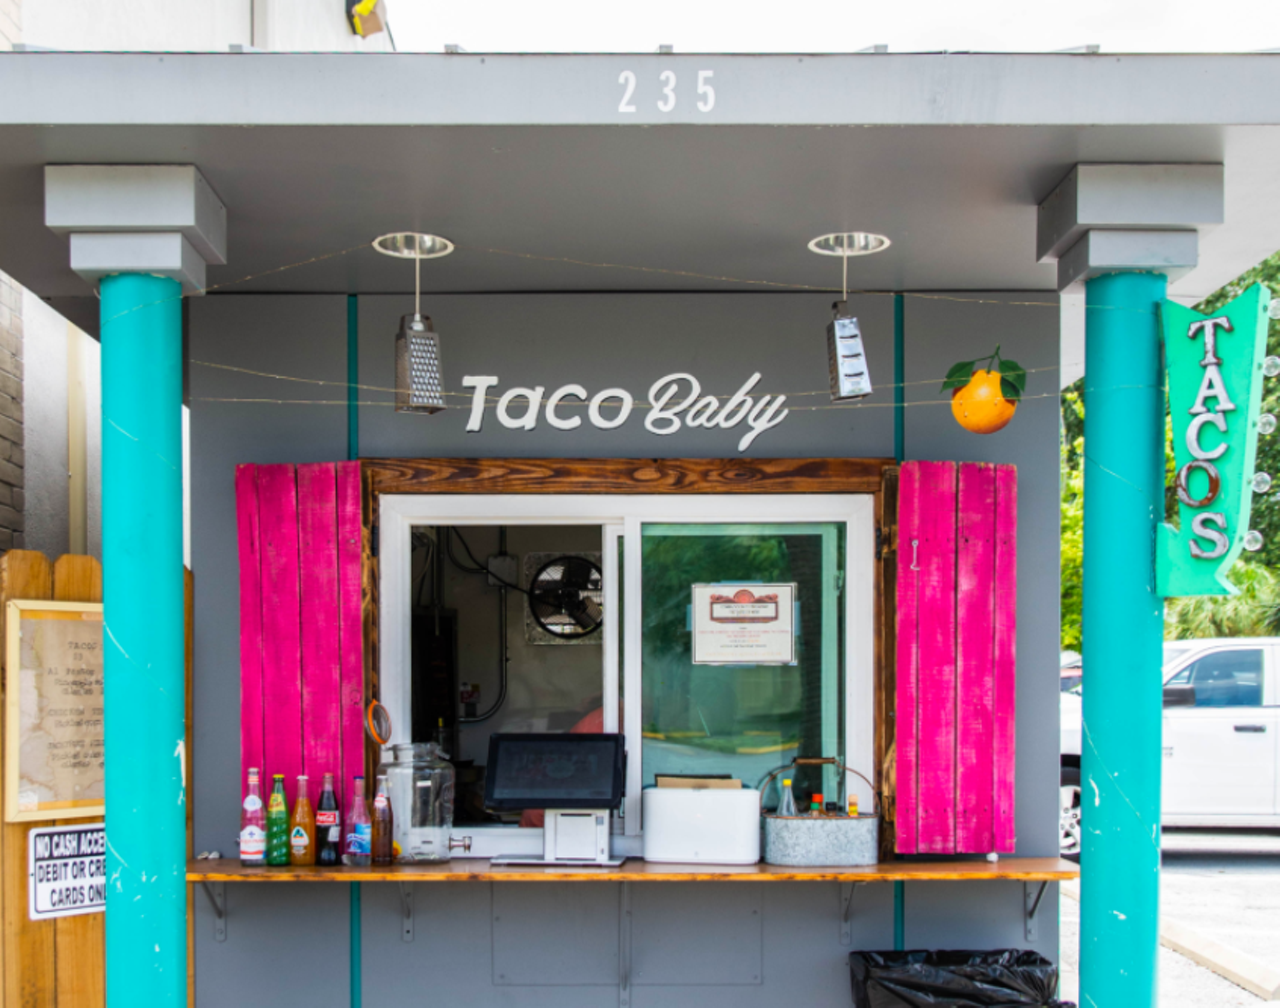 Taco Baby
5921 N .Nebraska Ave., Tampa (813) 238-1114
Florida&#146;s &#147;Tiniest taqueria,&#148; Taco Baby is a walk-up taco spot serving traditional and modern taco creations. There&#146;s not room for more than one person at a time inside this taco hut, but don&#146;t worry, they offer some outdoor seating right behind the building. 
Photo via Taco Baby/Website